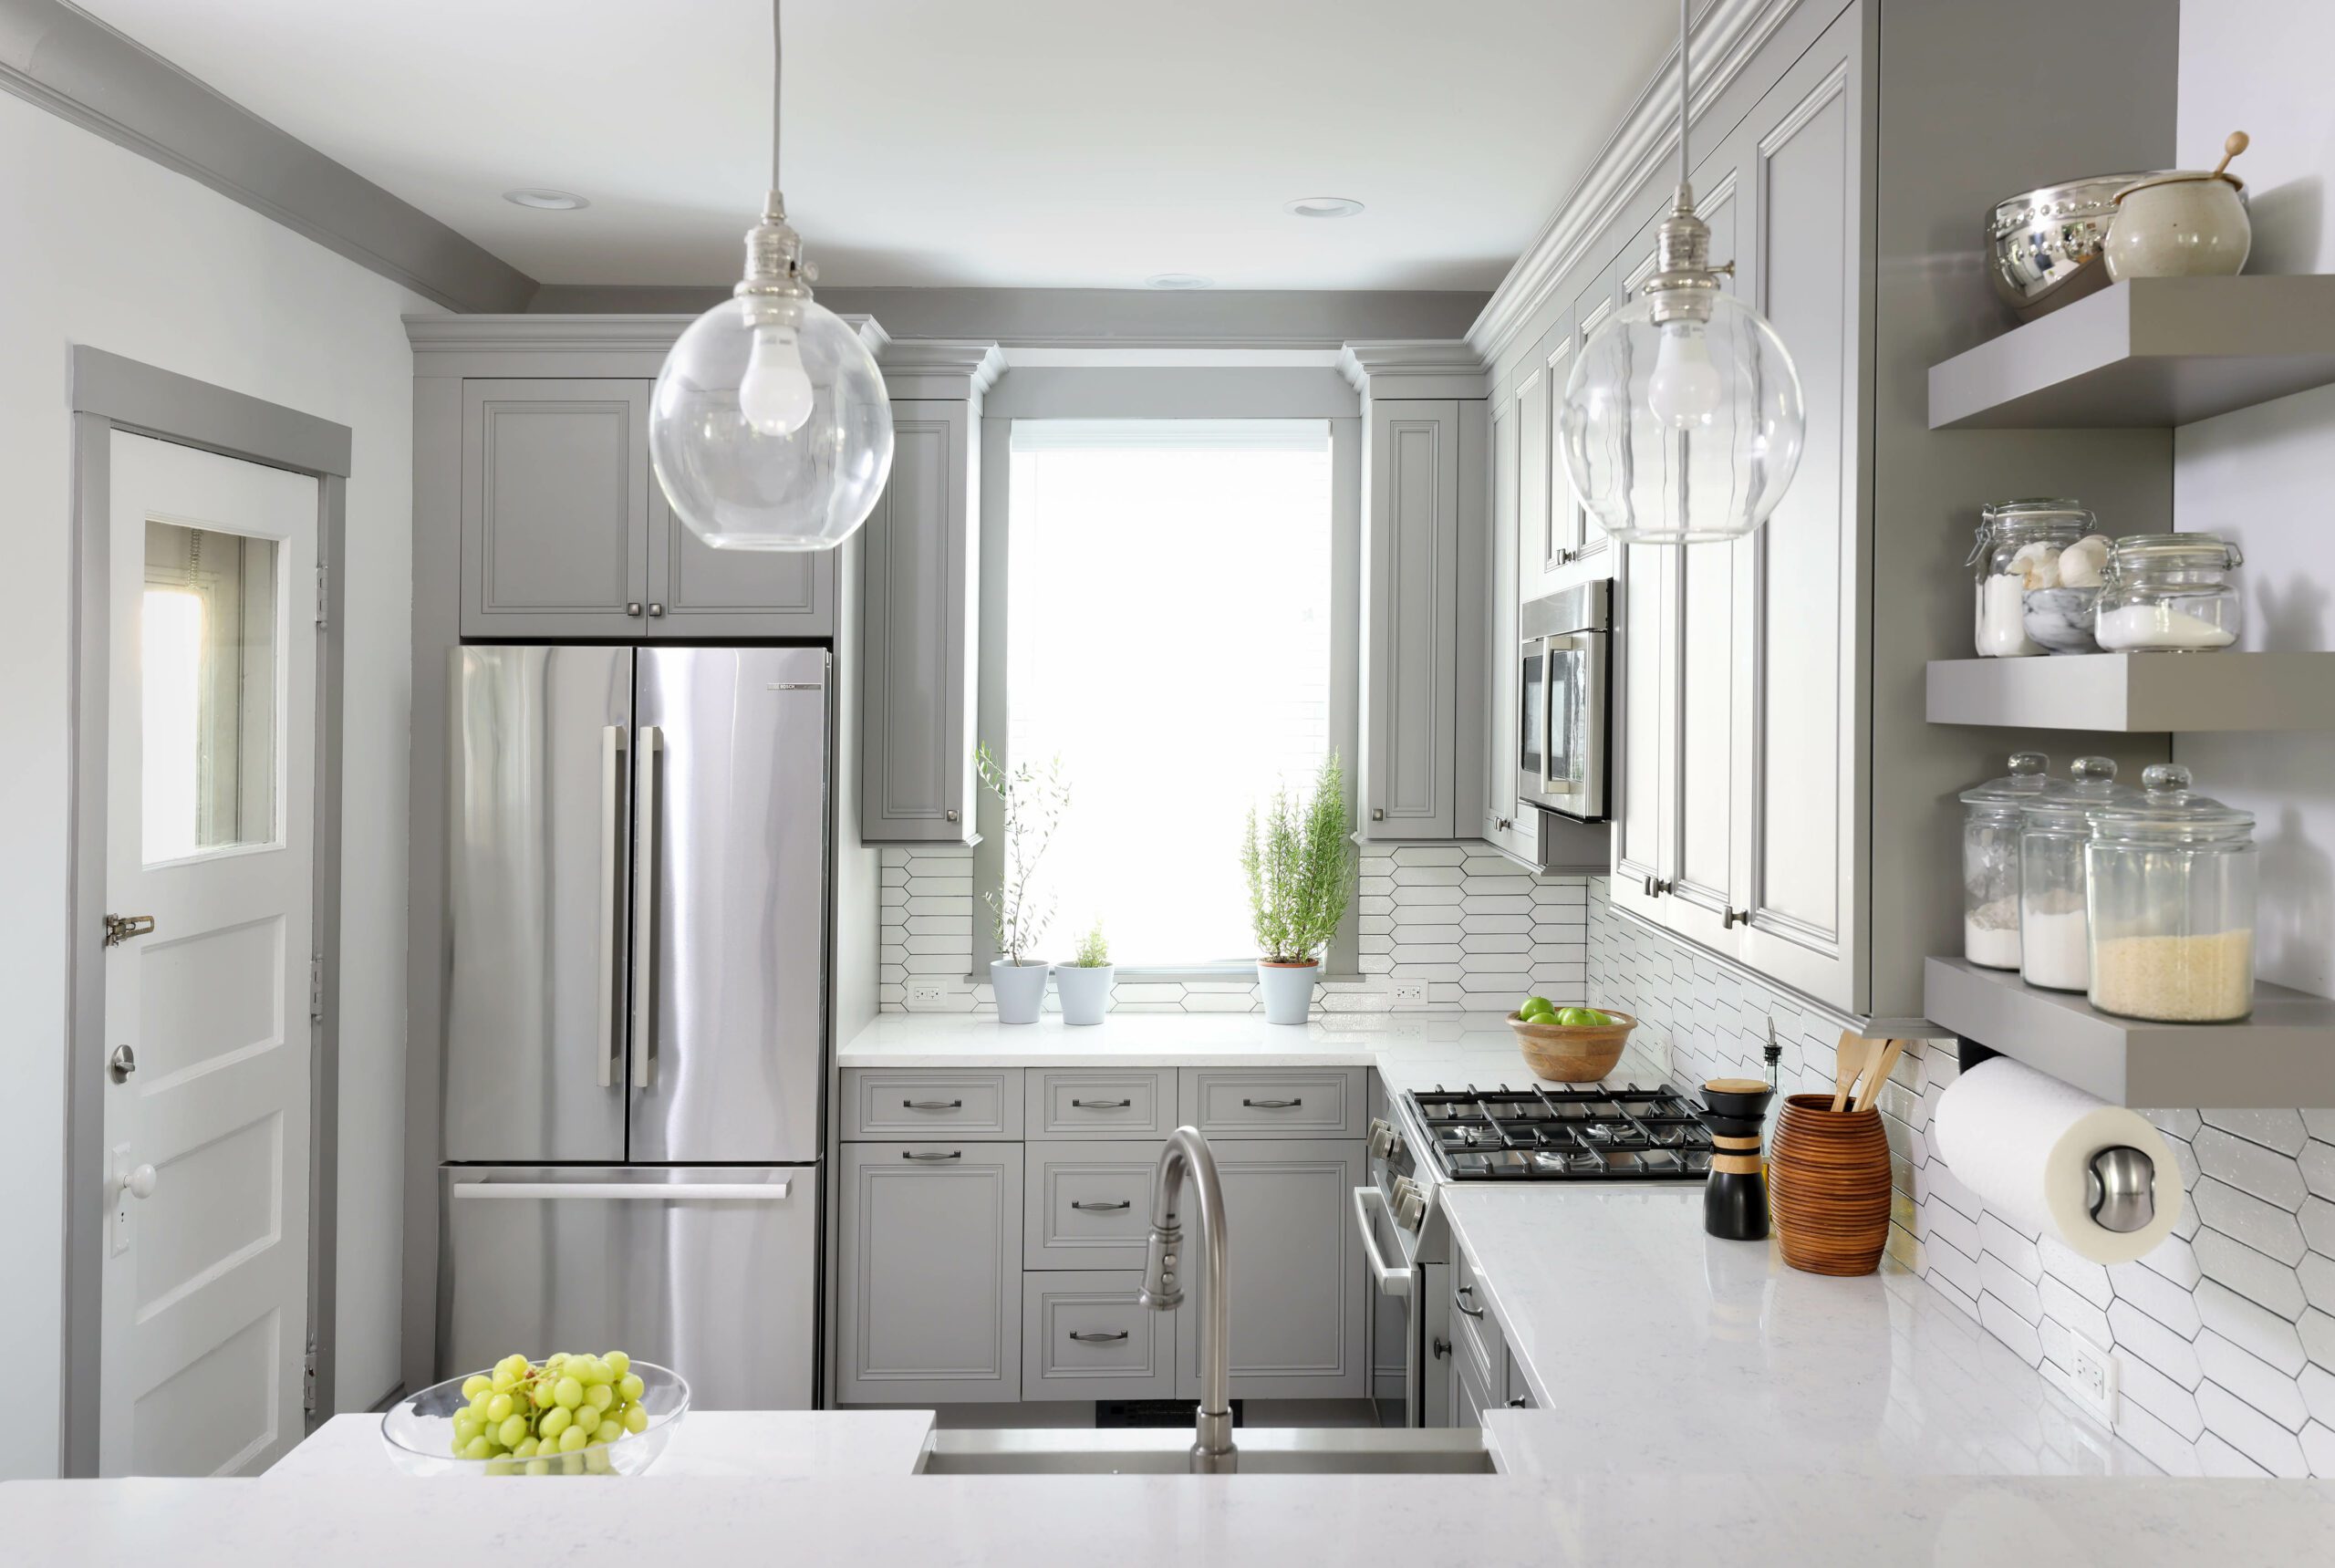 u-shaped gray kitchen with stainless steel sink and white ceramic backsplash